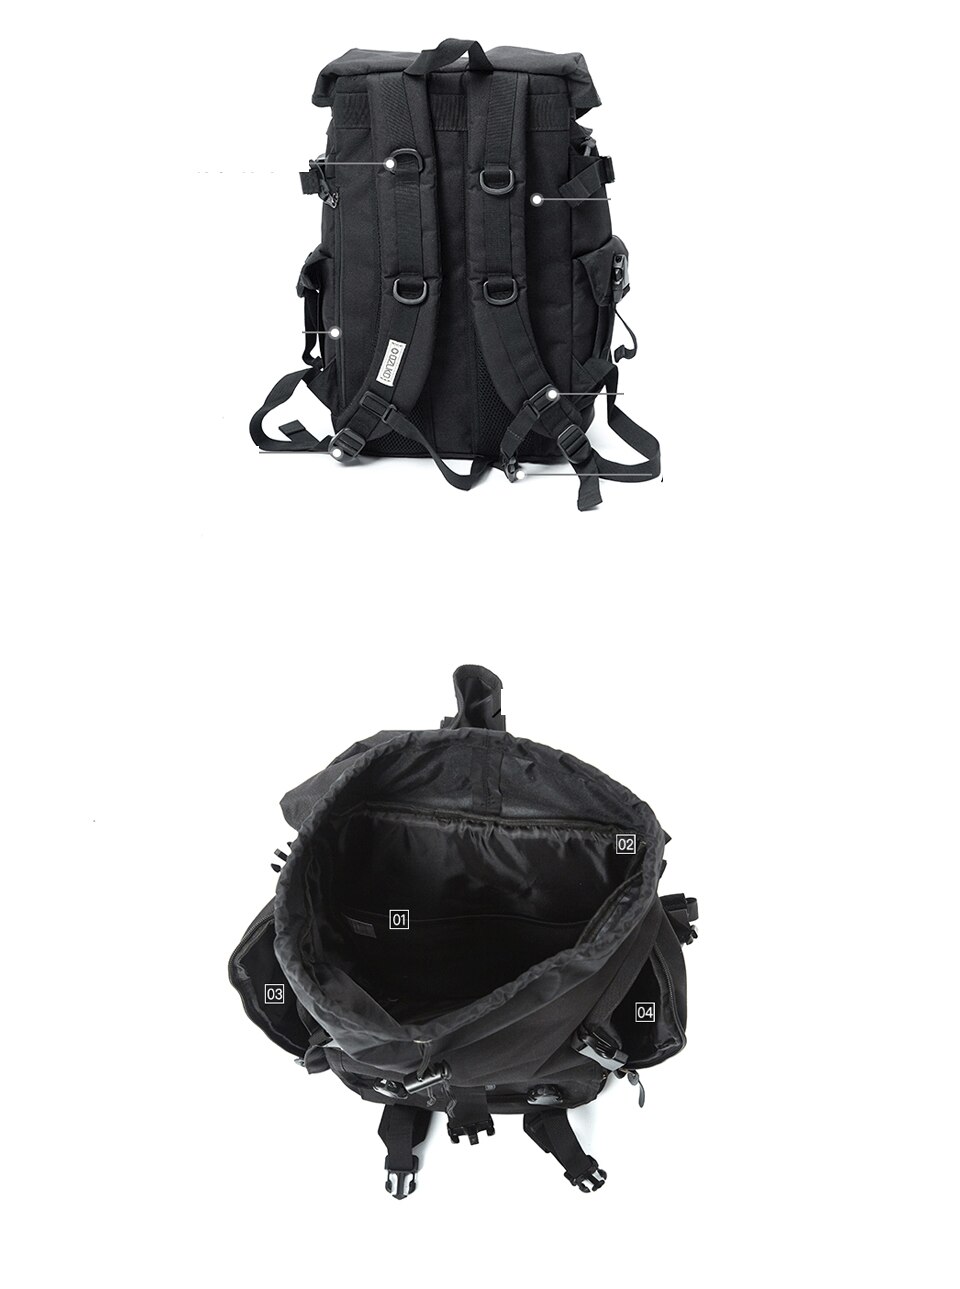 Street Style Men's Black Backpack with Buckles